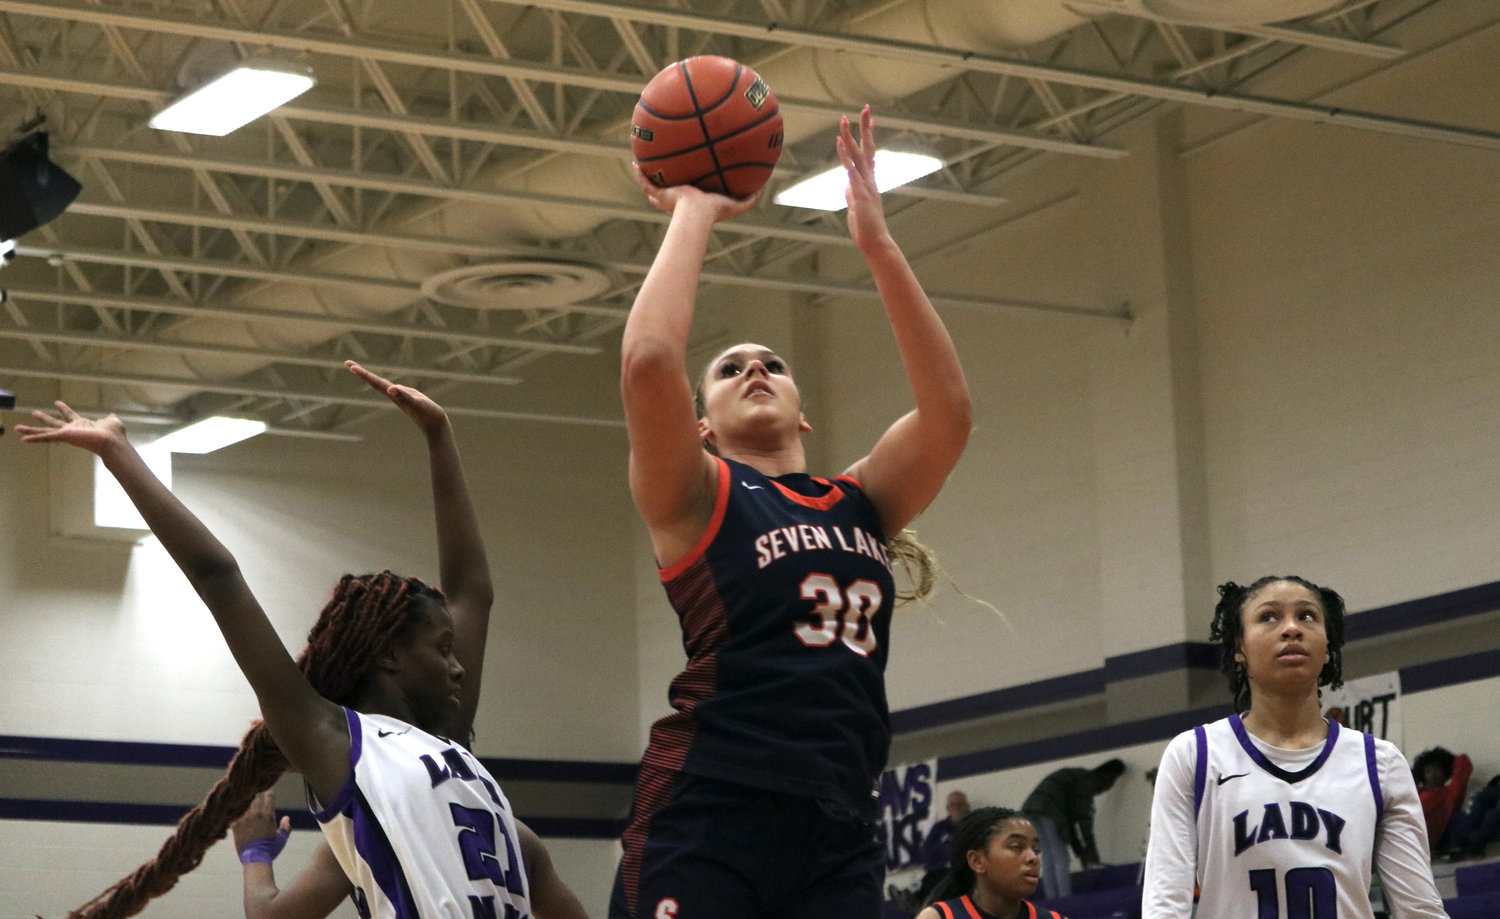 Justice Carlton shoots a floater during Friday's game between Seven Lakes and Morton Ranch at the Morton Ranch gym.